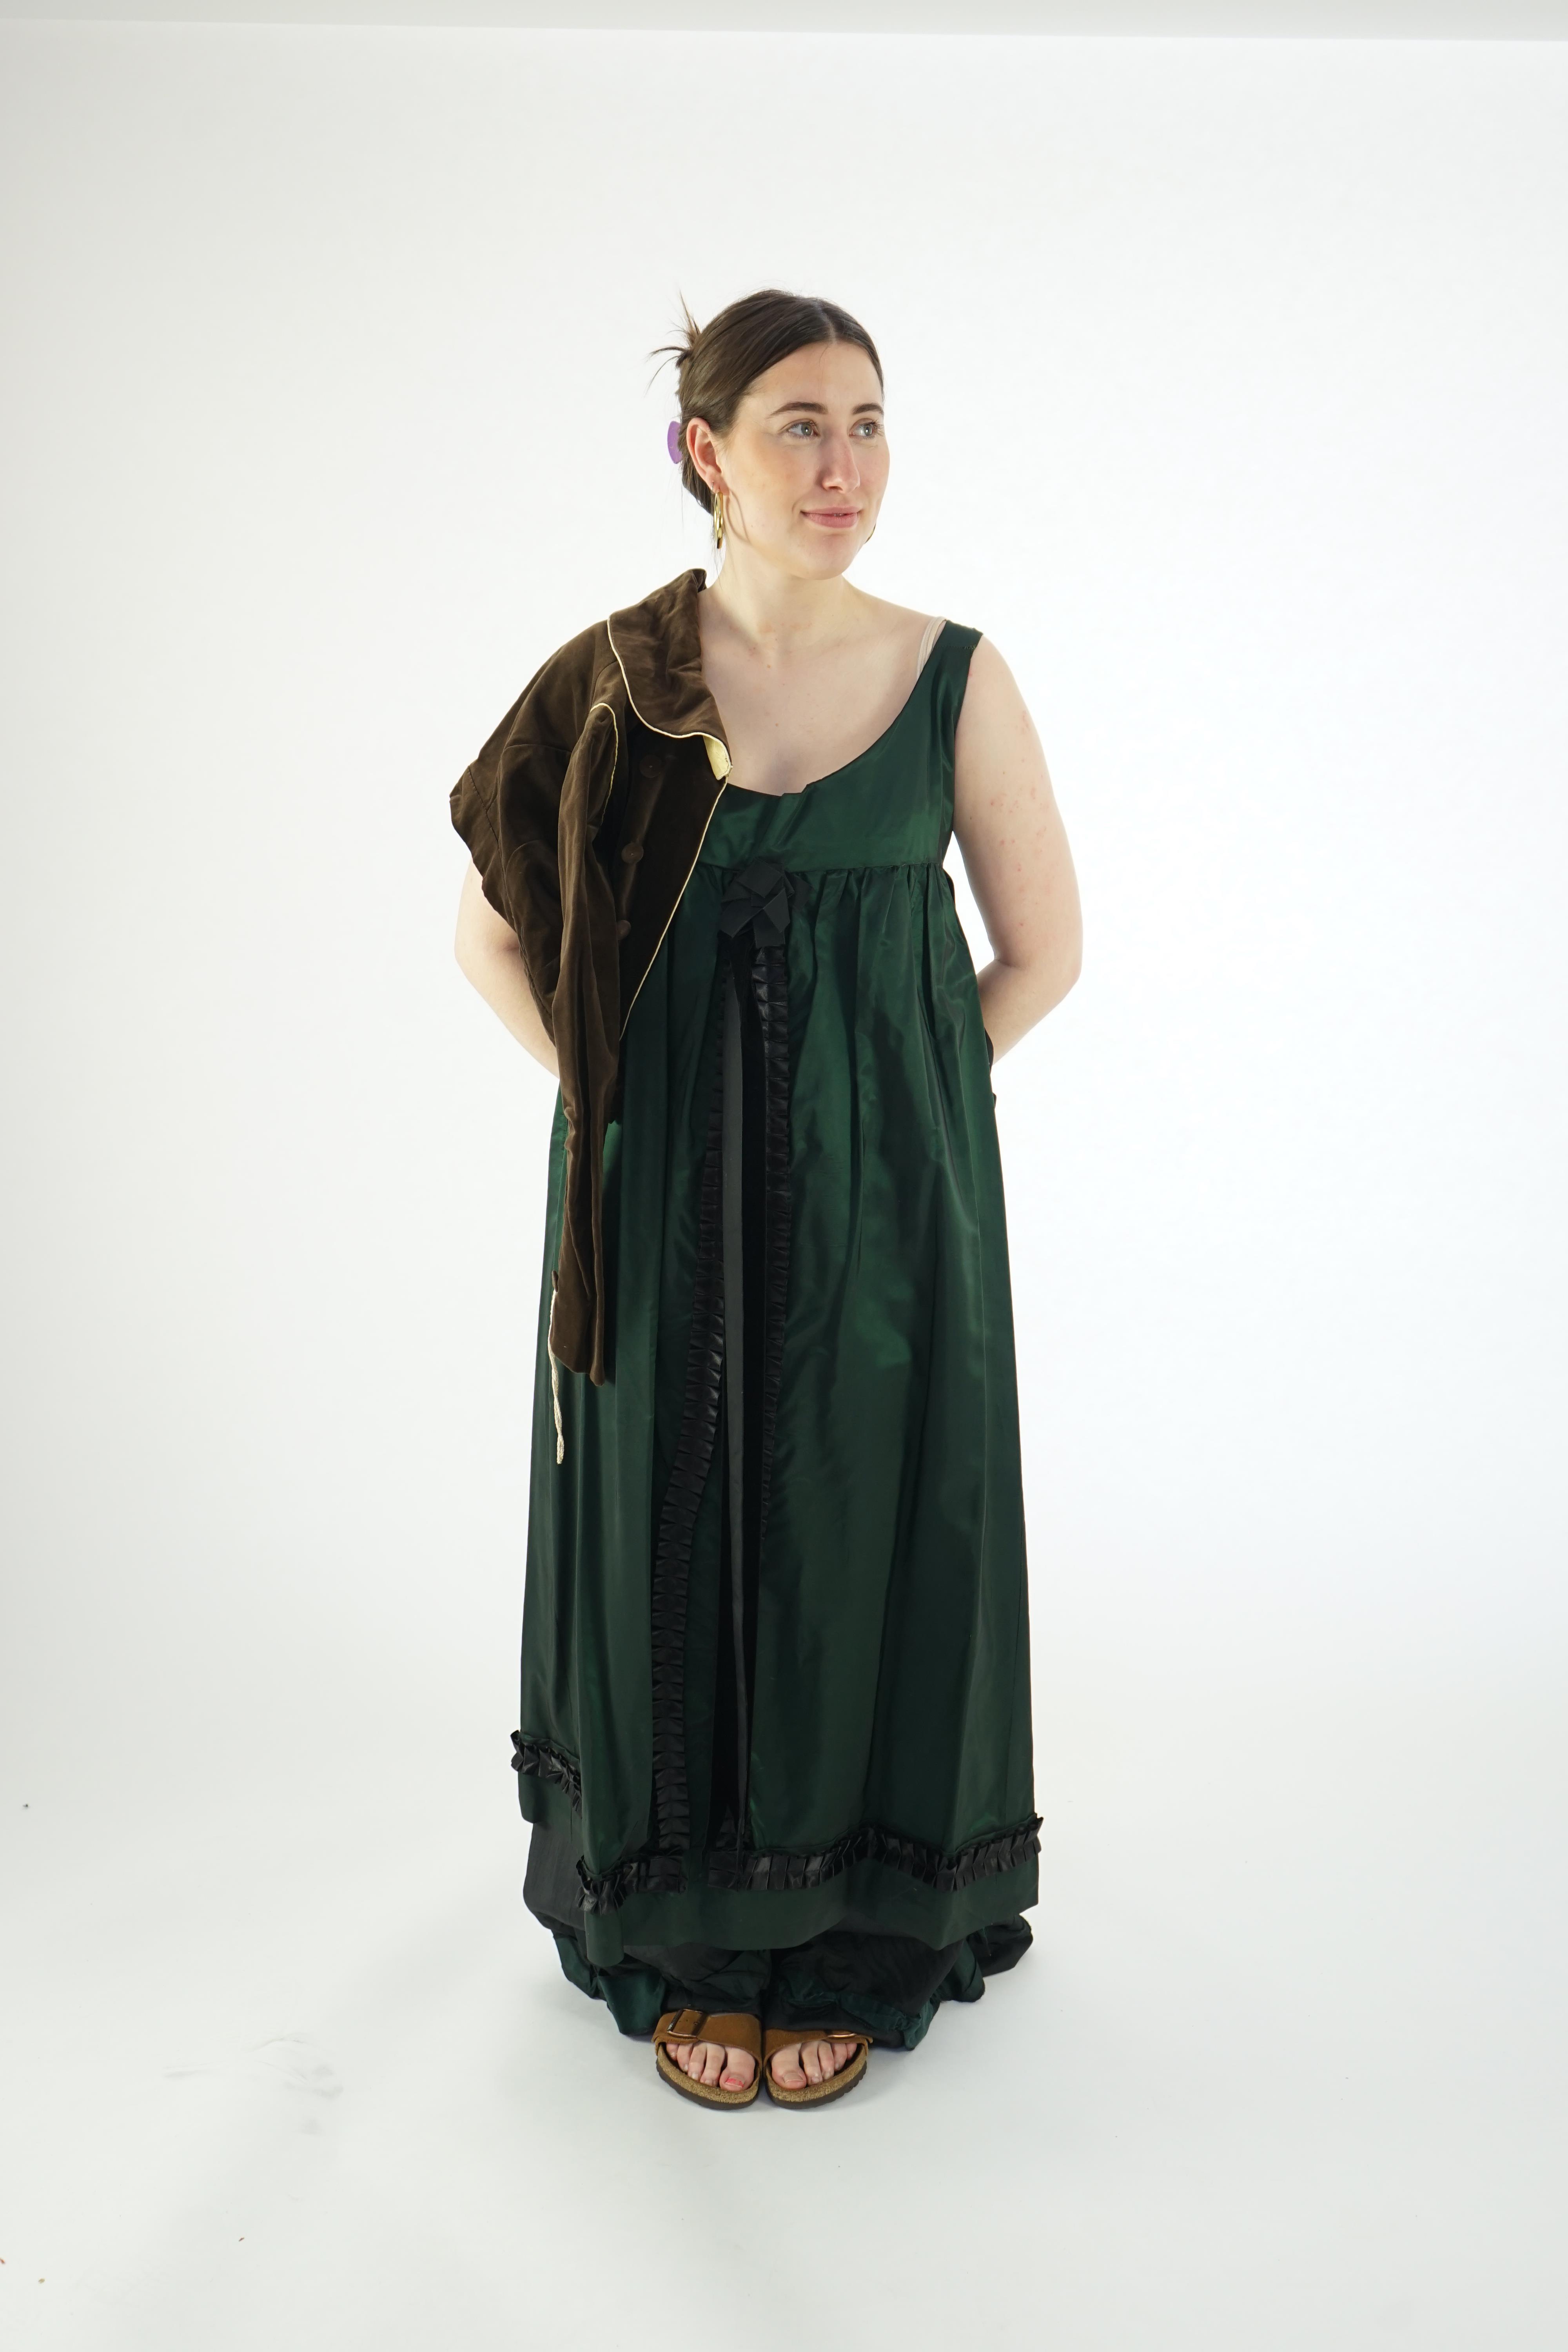 Two lady's Regency style day dresses (1 x dark green taffeta dress with brown short jacket and 1 x bottle green fine cord day dress and short matching jacket)., Ex Carl Rosa Opera Company.